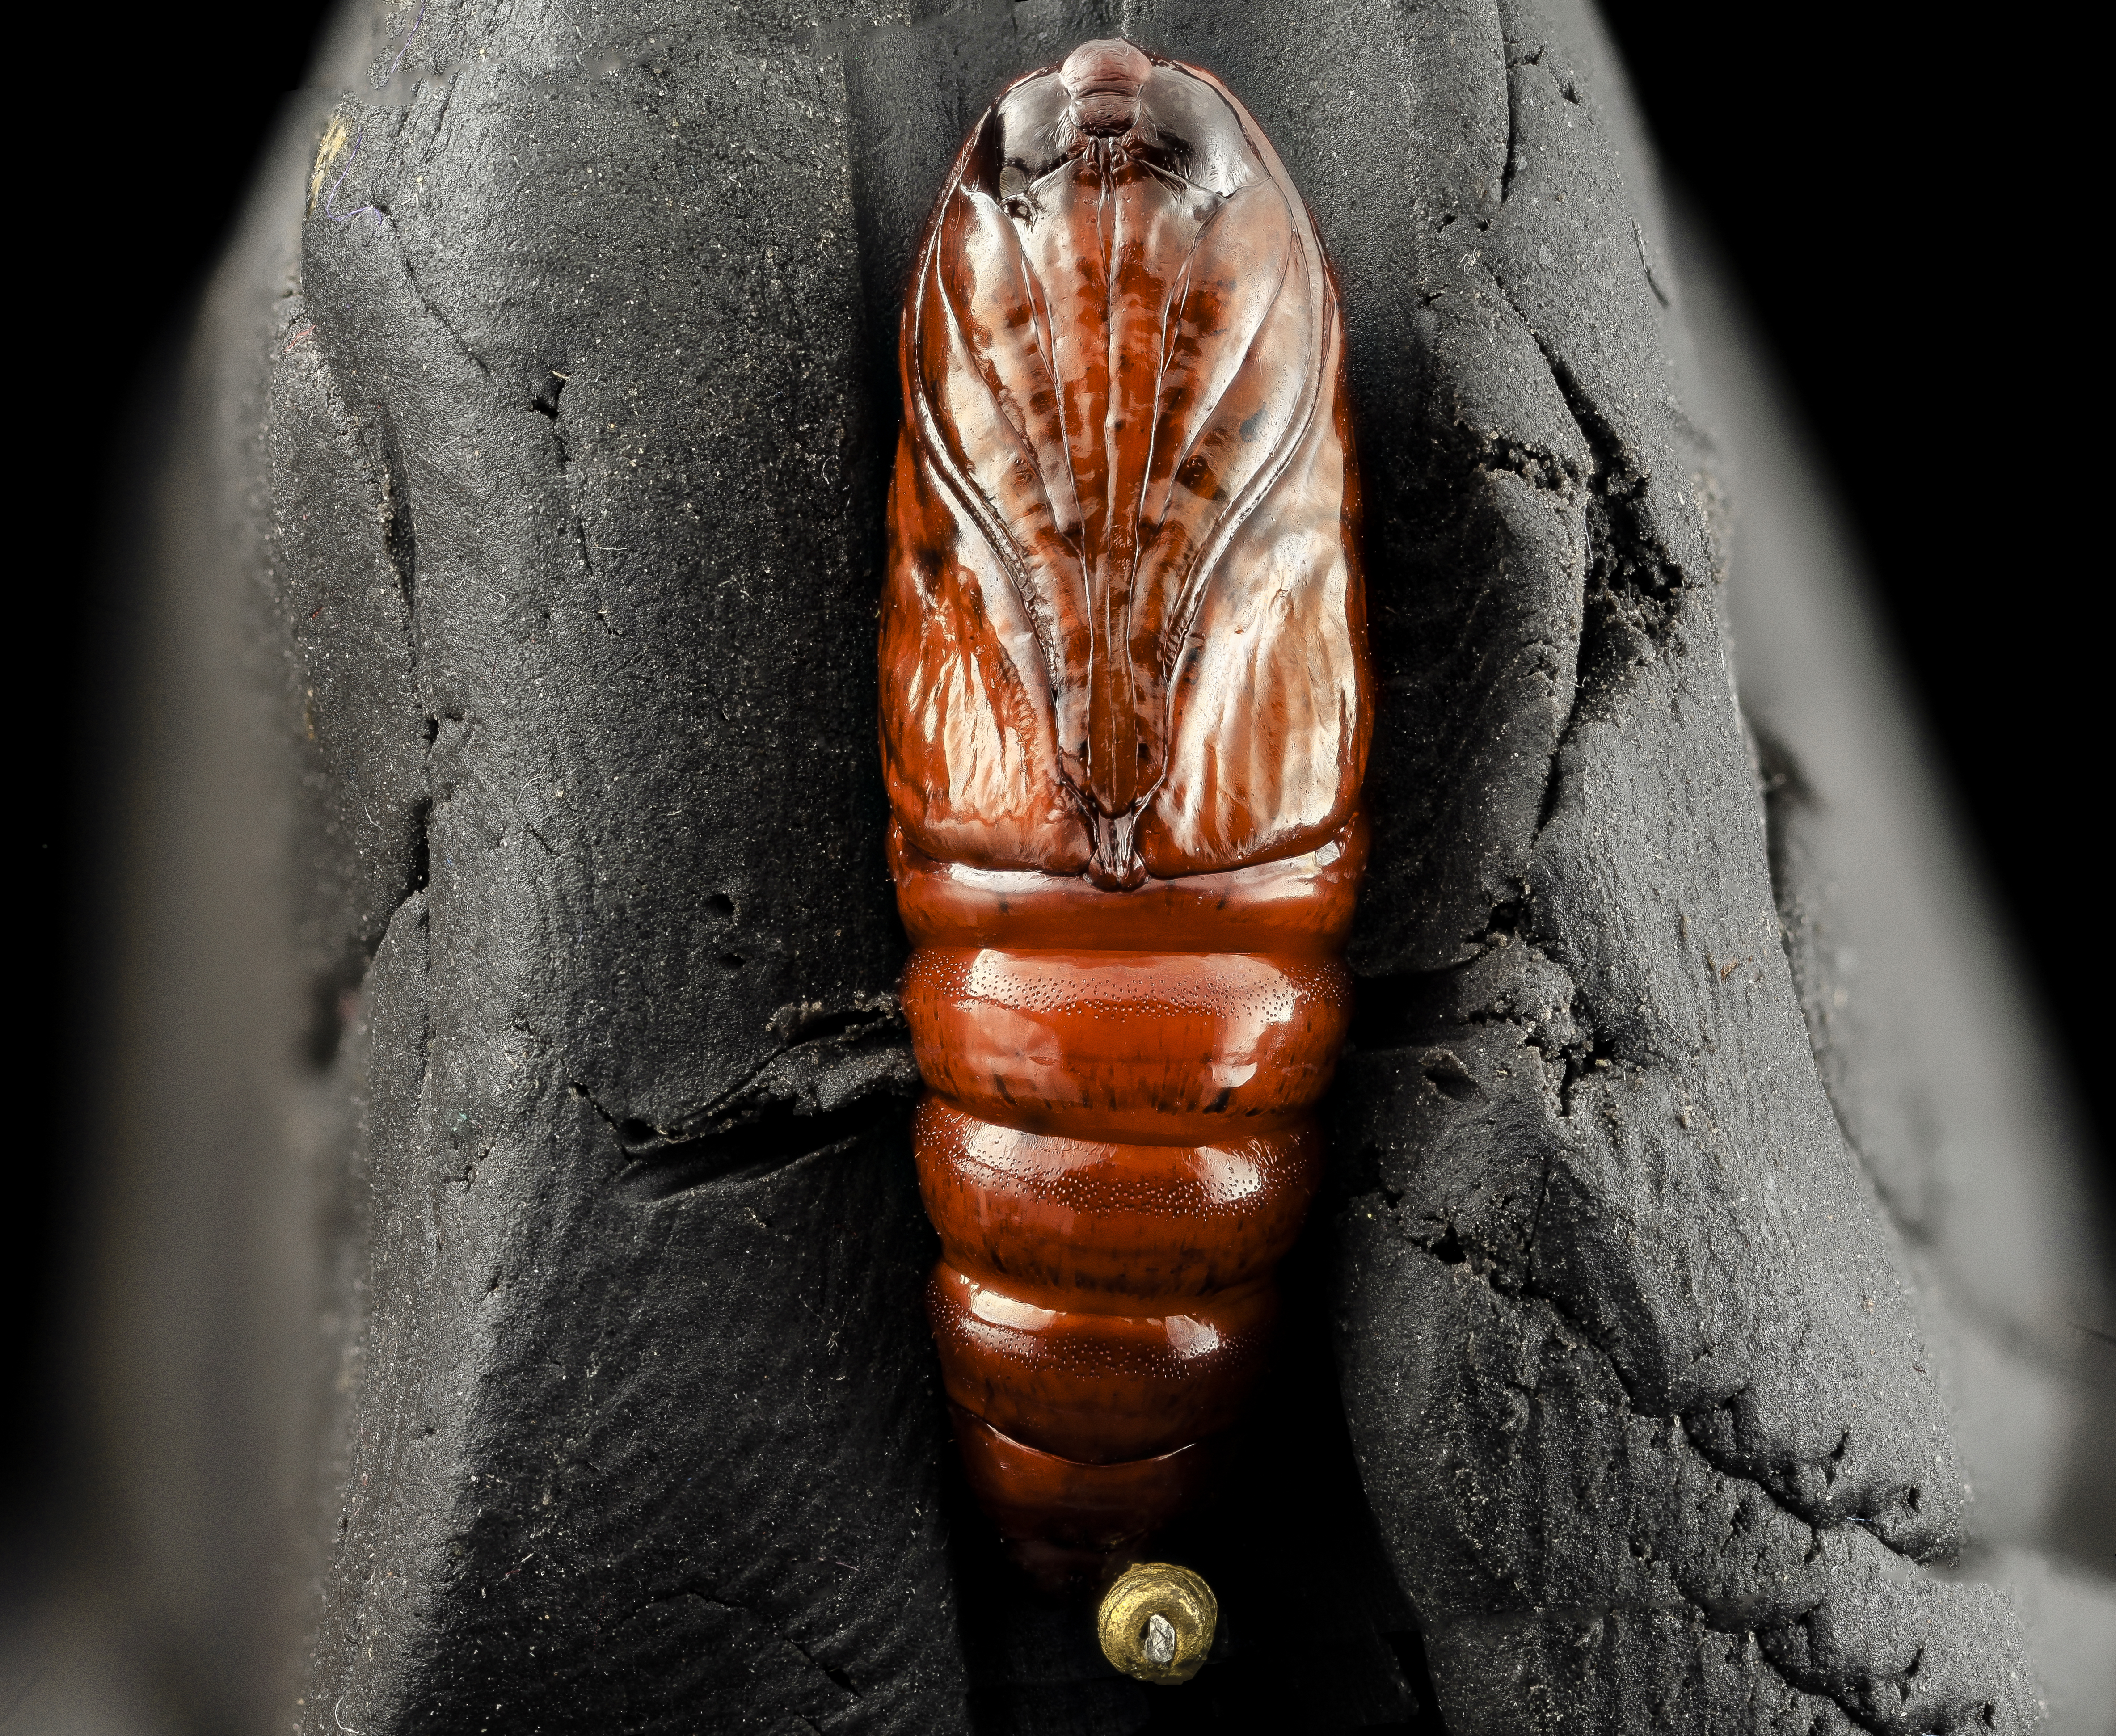 Southern armyworm pupae, underside 2014-06-04-18.34.00 ZS PMax (15316096994)